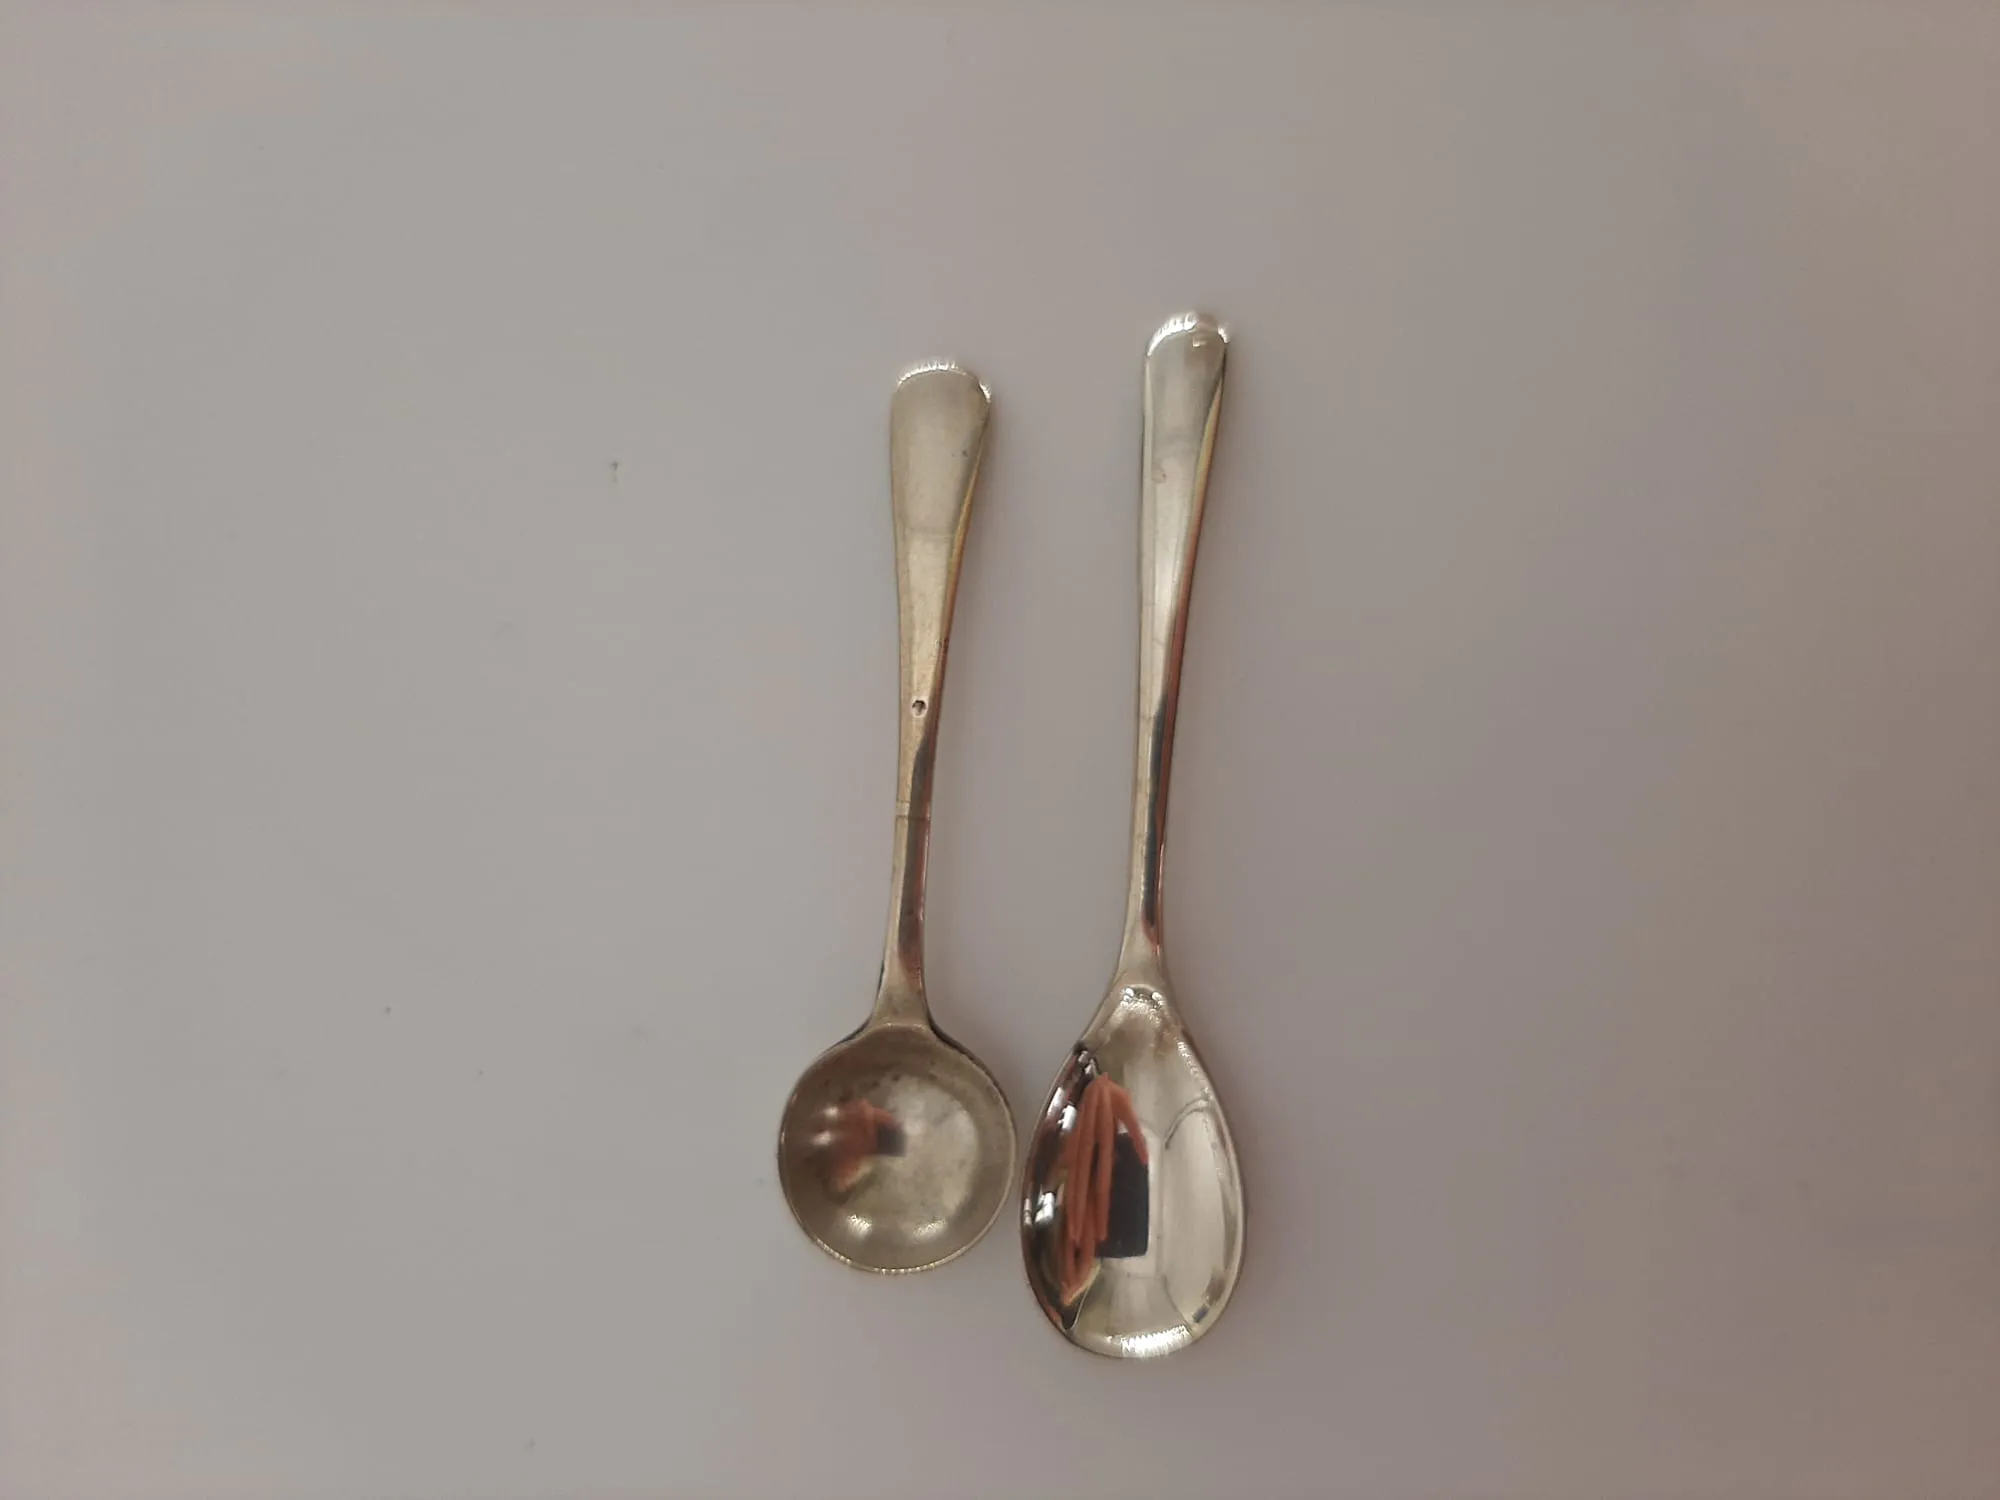 Birmingham 1949 Solid Silver Condiment Set by Mappin & Webb